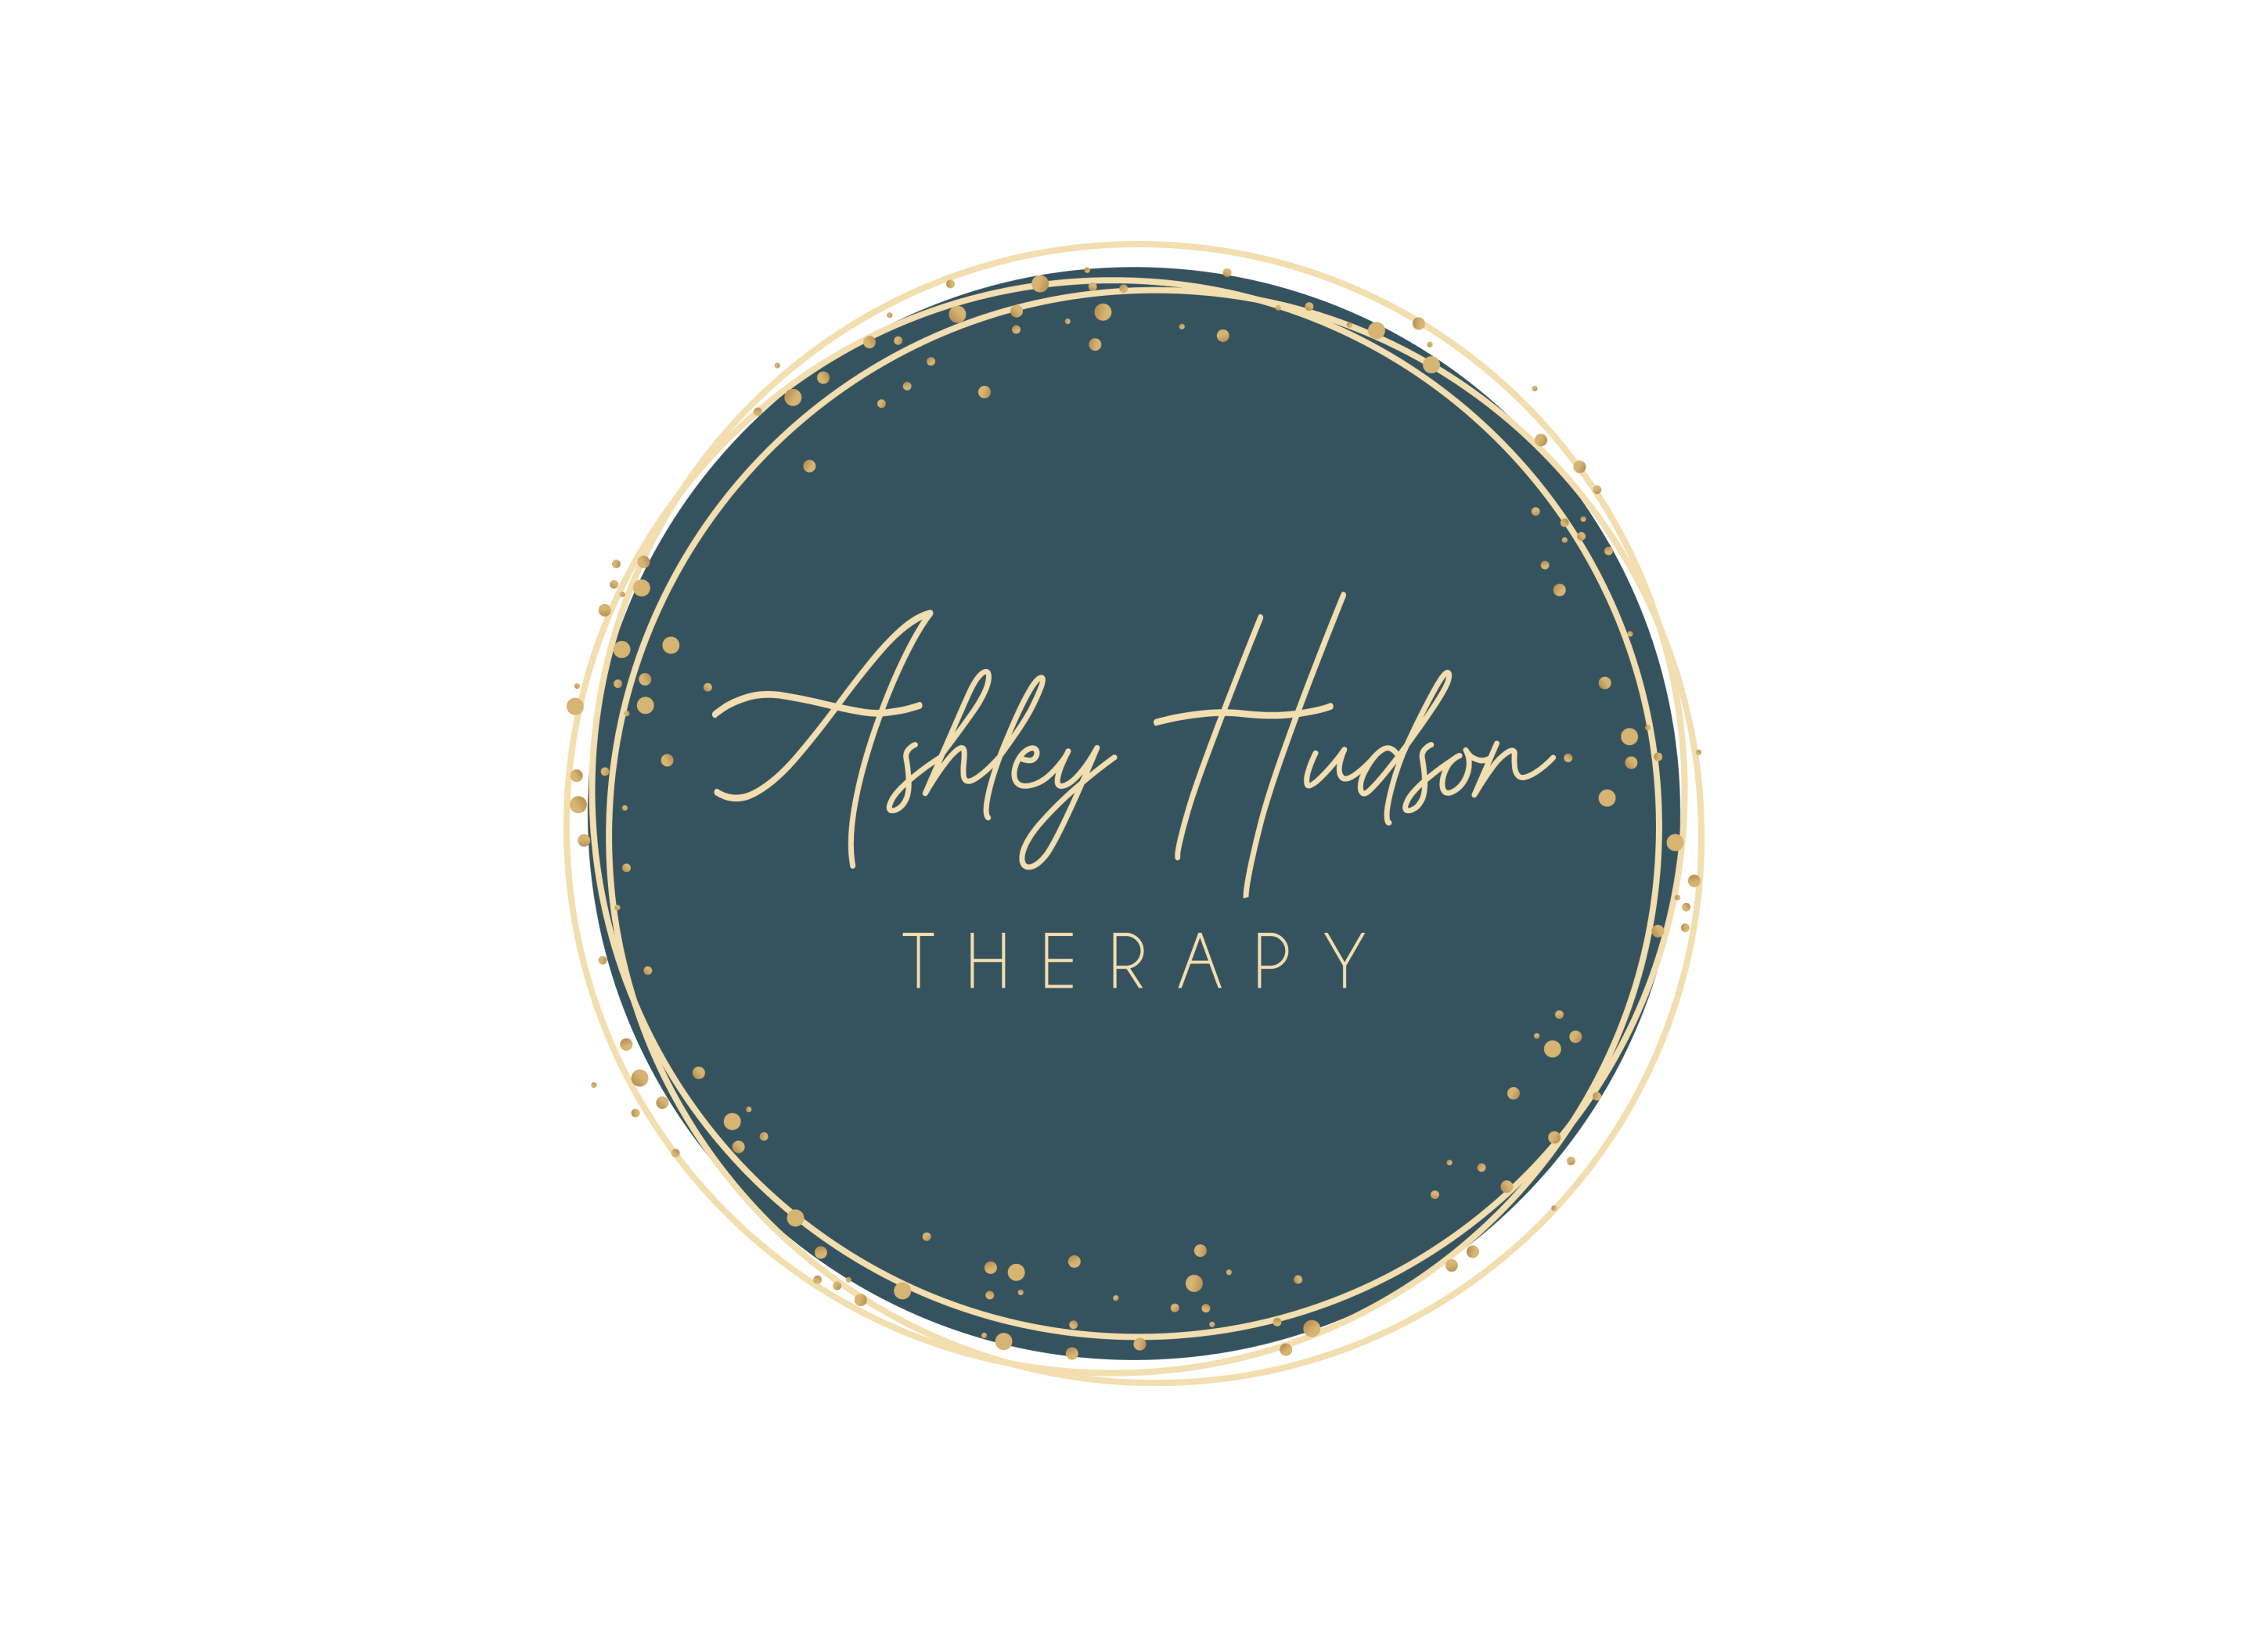 Effective, Caring, Compassionate - Ashley Hudson Therapy